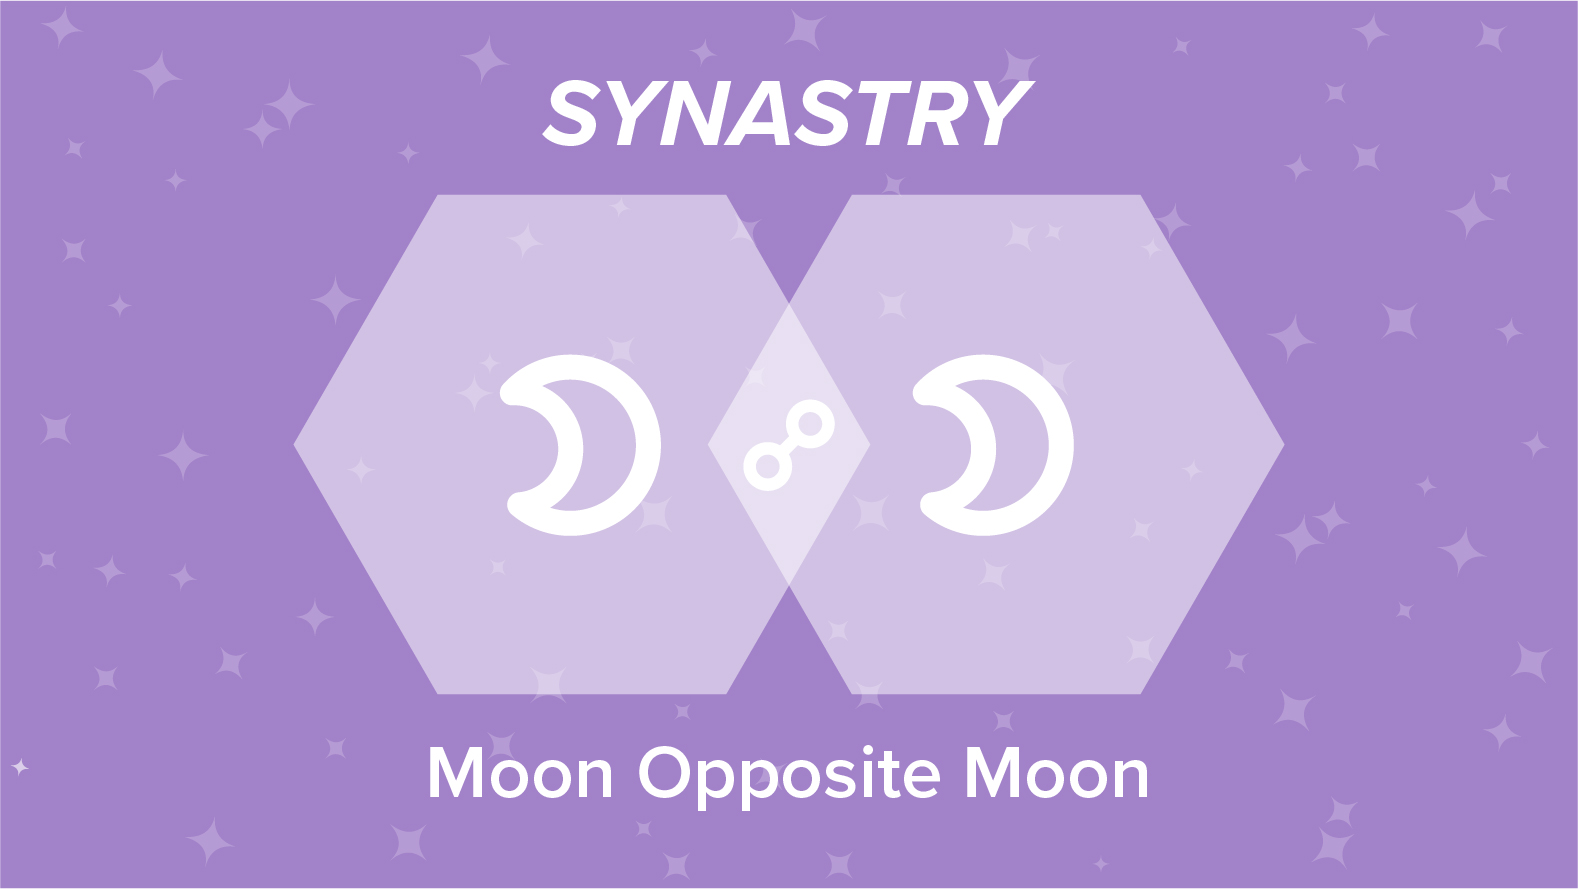 Moon Opposite Moon Synastry: Relationships and Friendships Explained